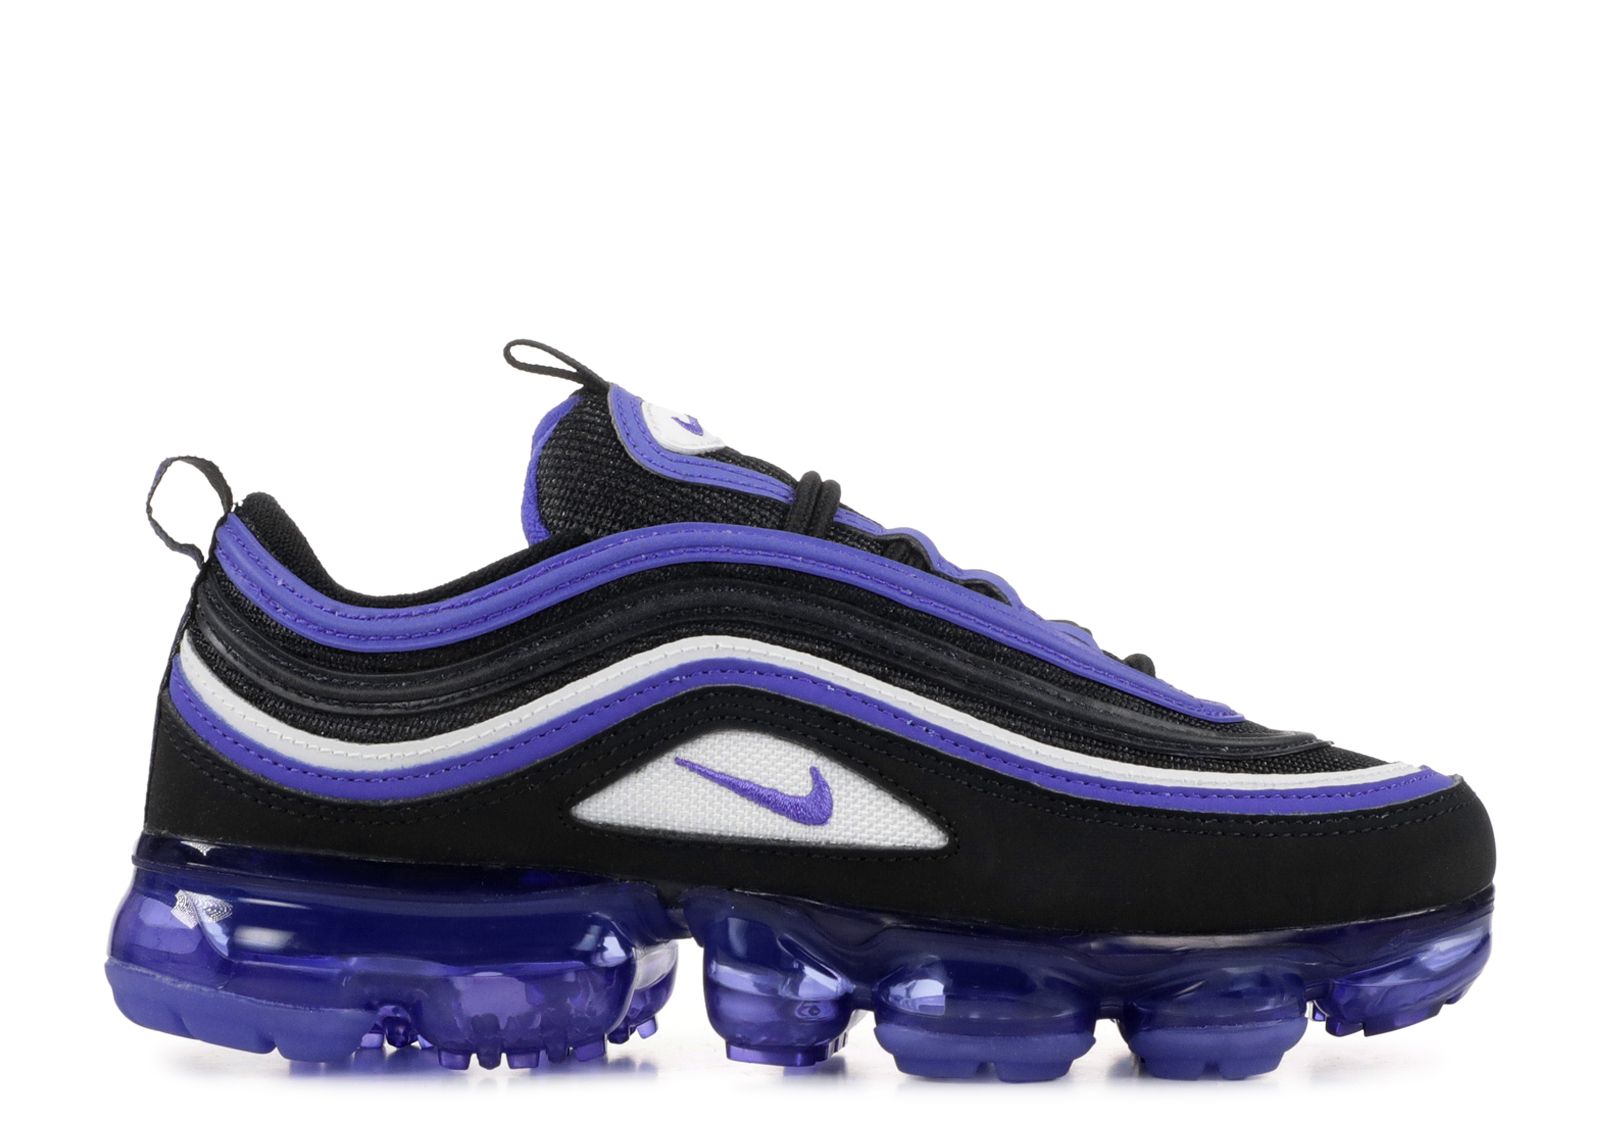 Nike Air Vapormax 97 Woman Heated in Free Market